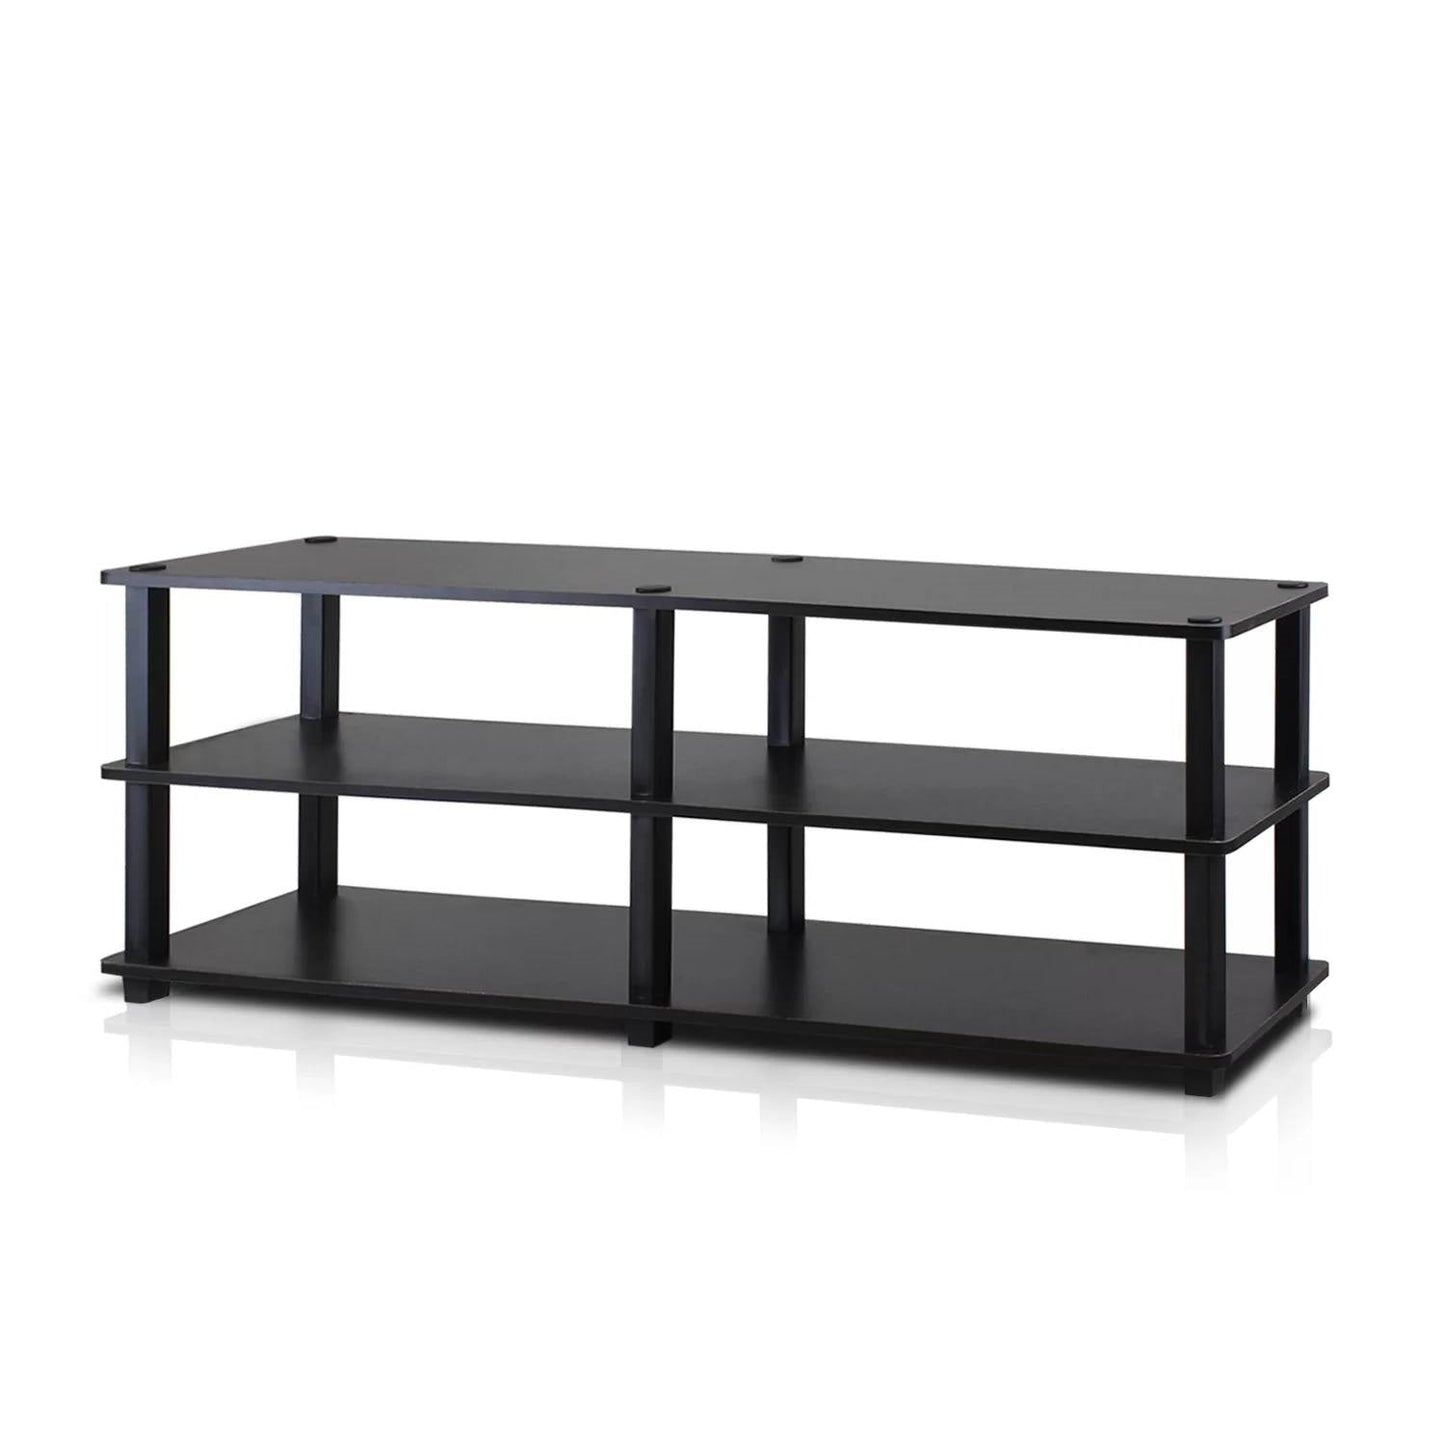 Accents > Shoe Racks - Modern 3-Shelf Espresso Black Shoe Rack - Holds Up To 18 Pair Of Shoes